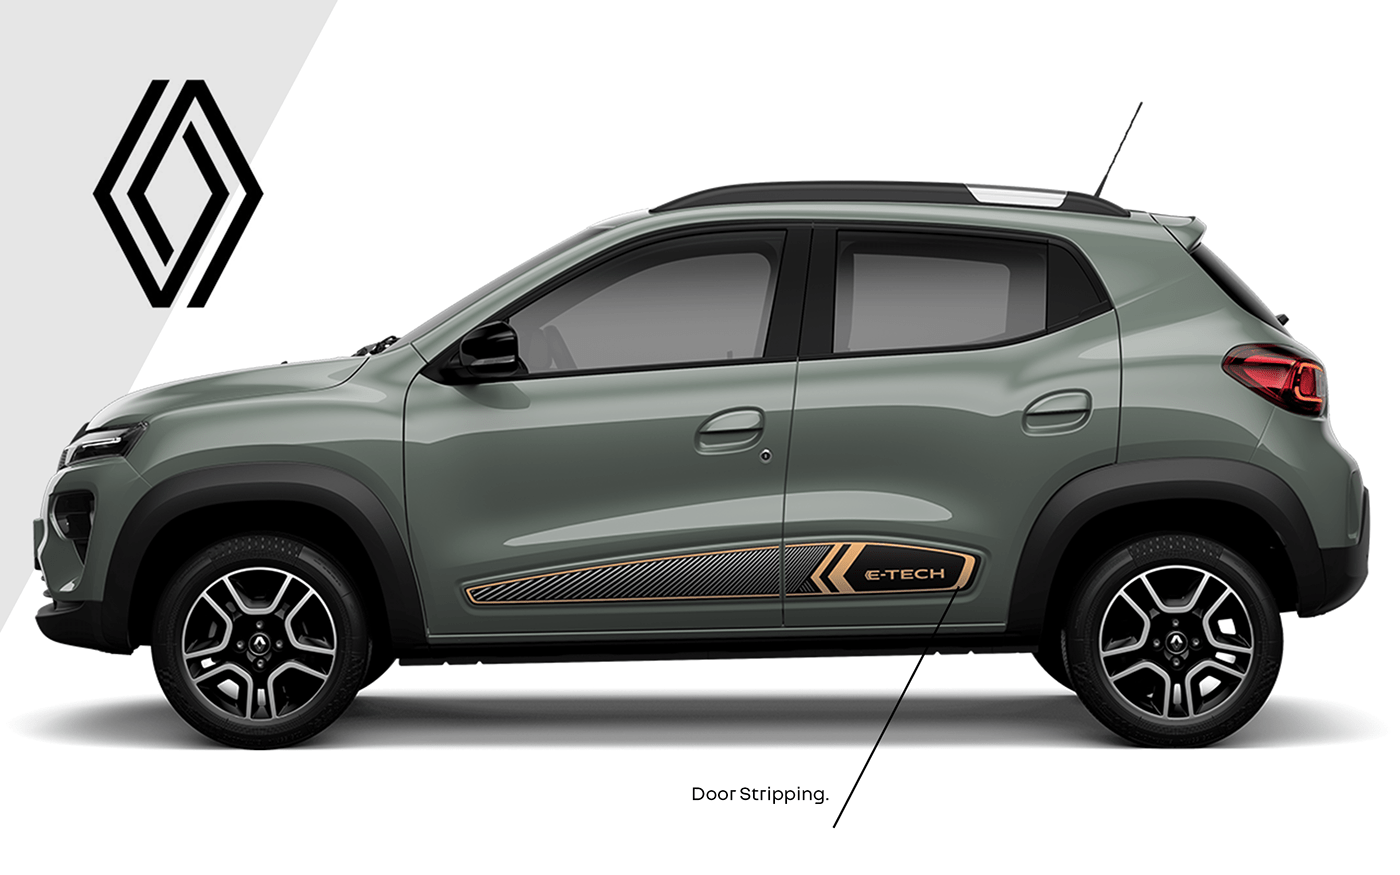 cmf CMF Design electricity eletric etech kwid material renault